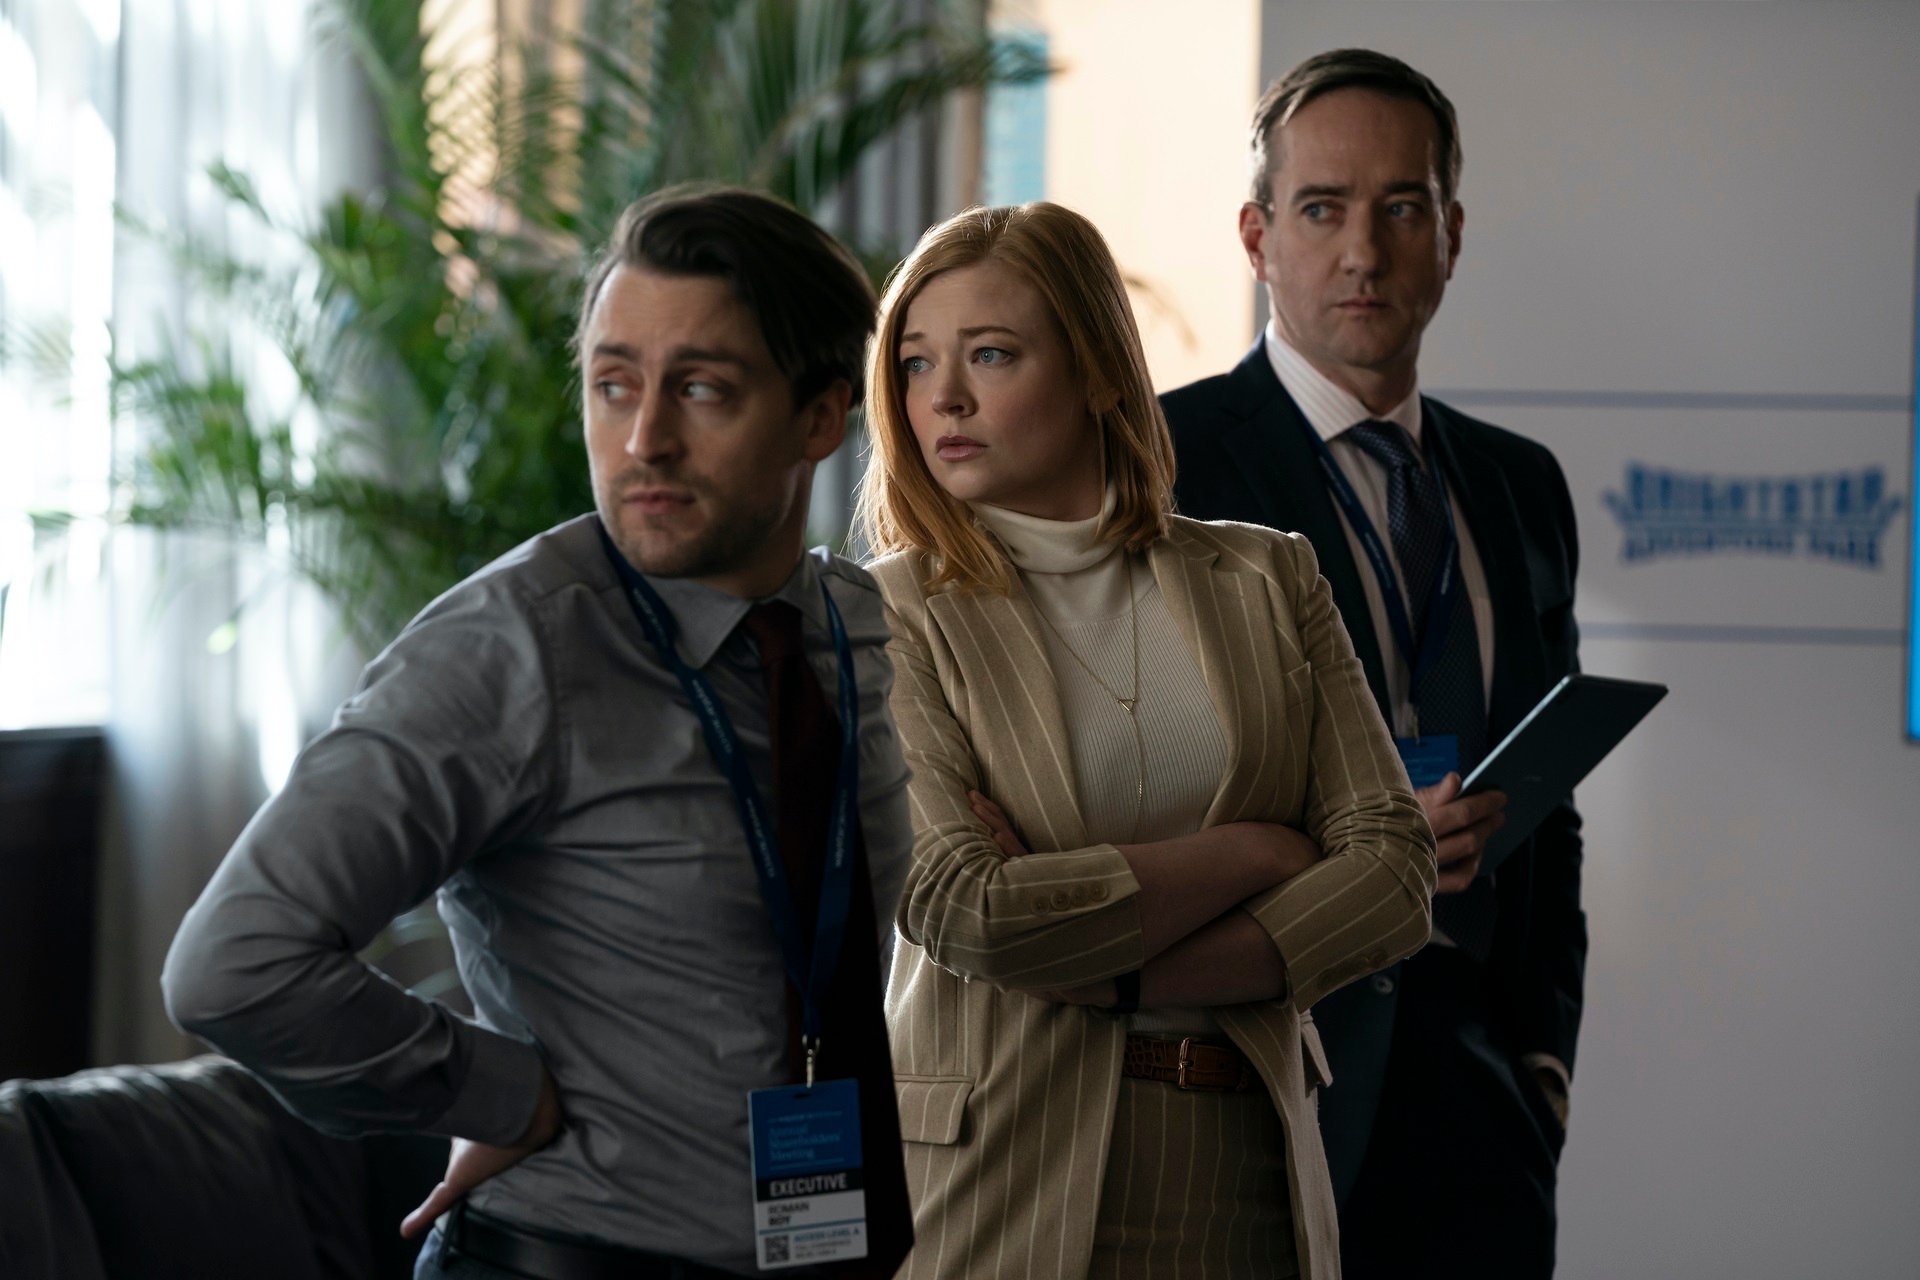 Kieran Culkin, Sarah Snook and Matthew Macfadyen in 'Succession' looking at something in the distance as Roman, Shiv, and Tom